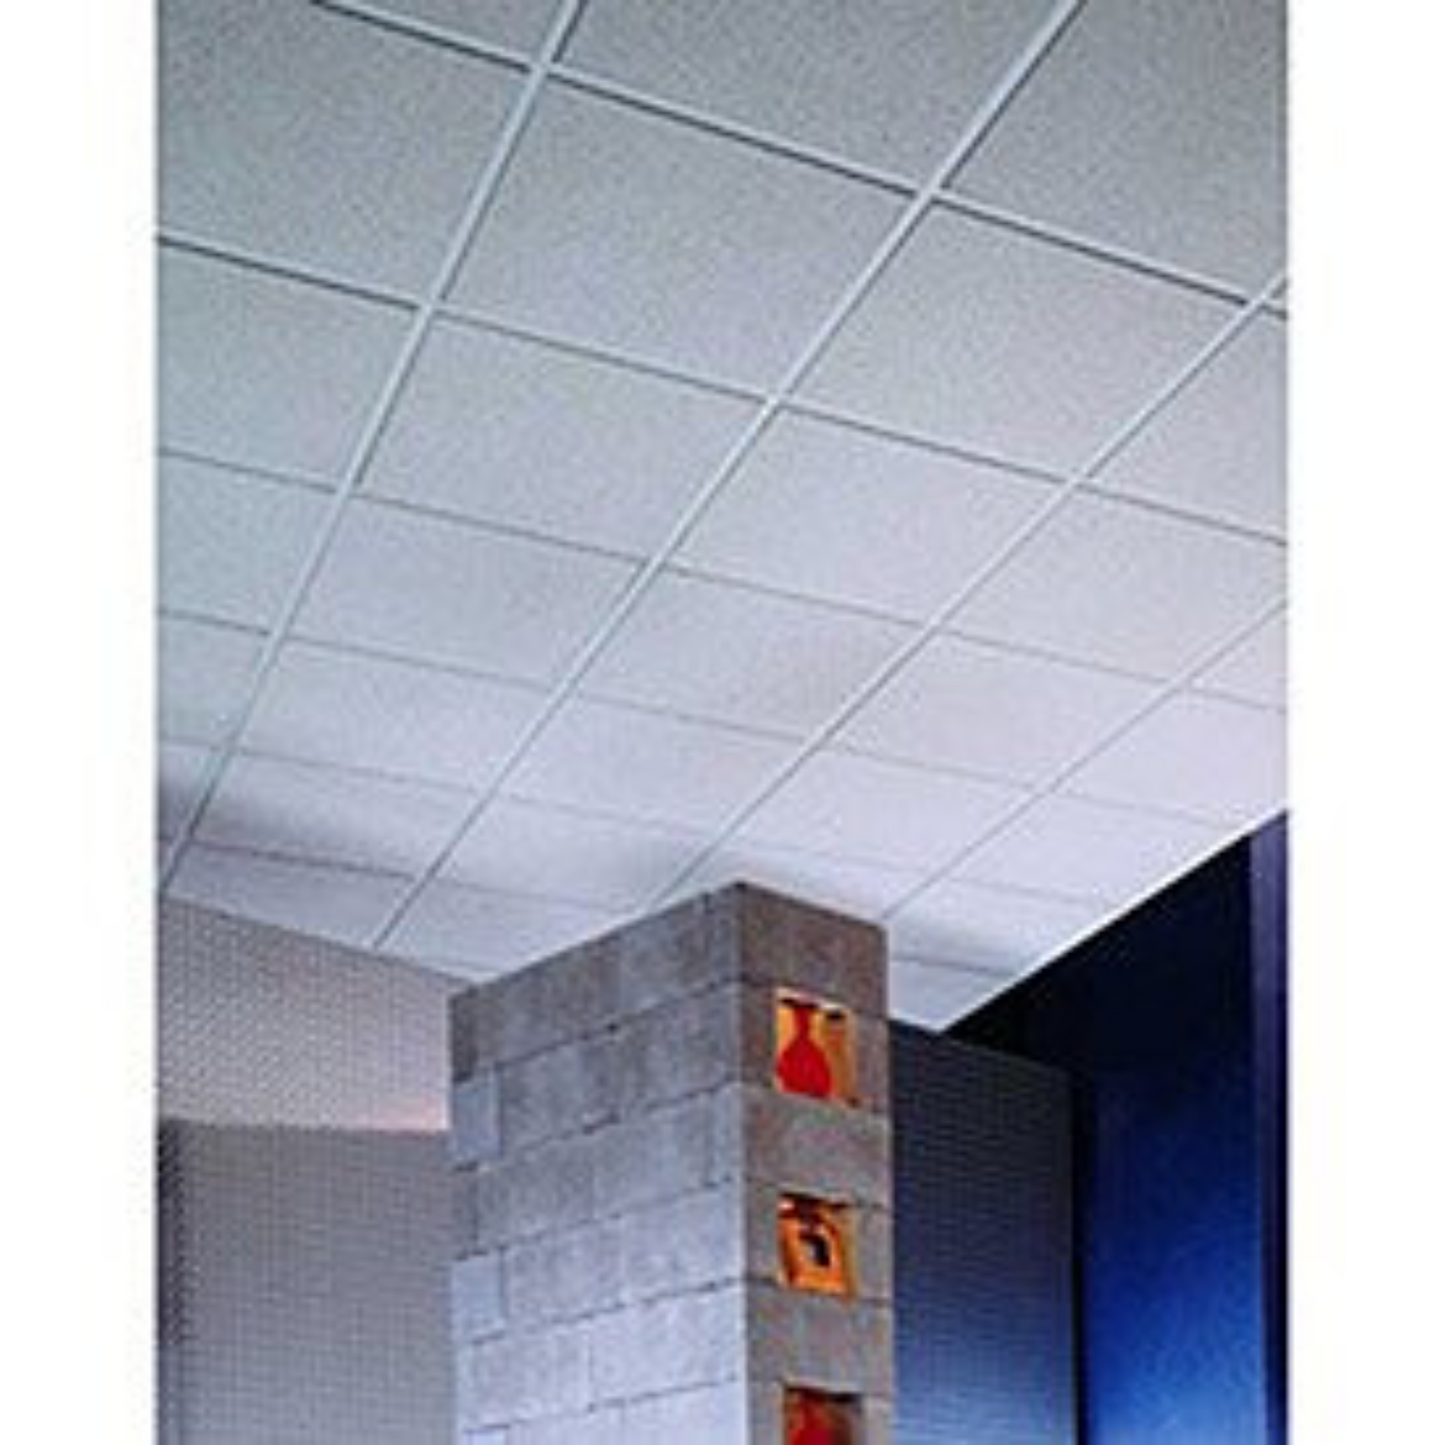 Usg Cross Tee (Fire Rated) Ceiling Suspension System, White, 24" X 15/16"